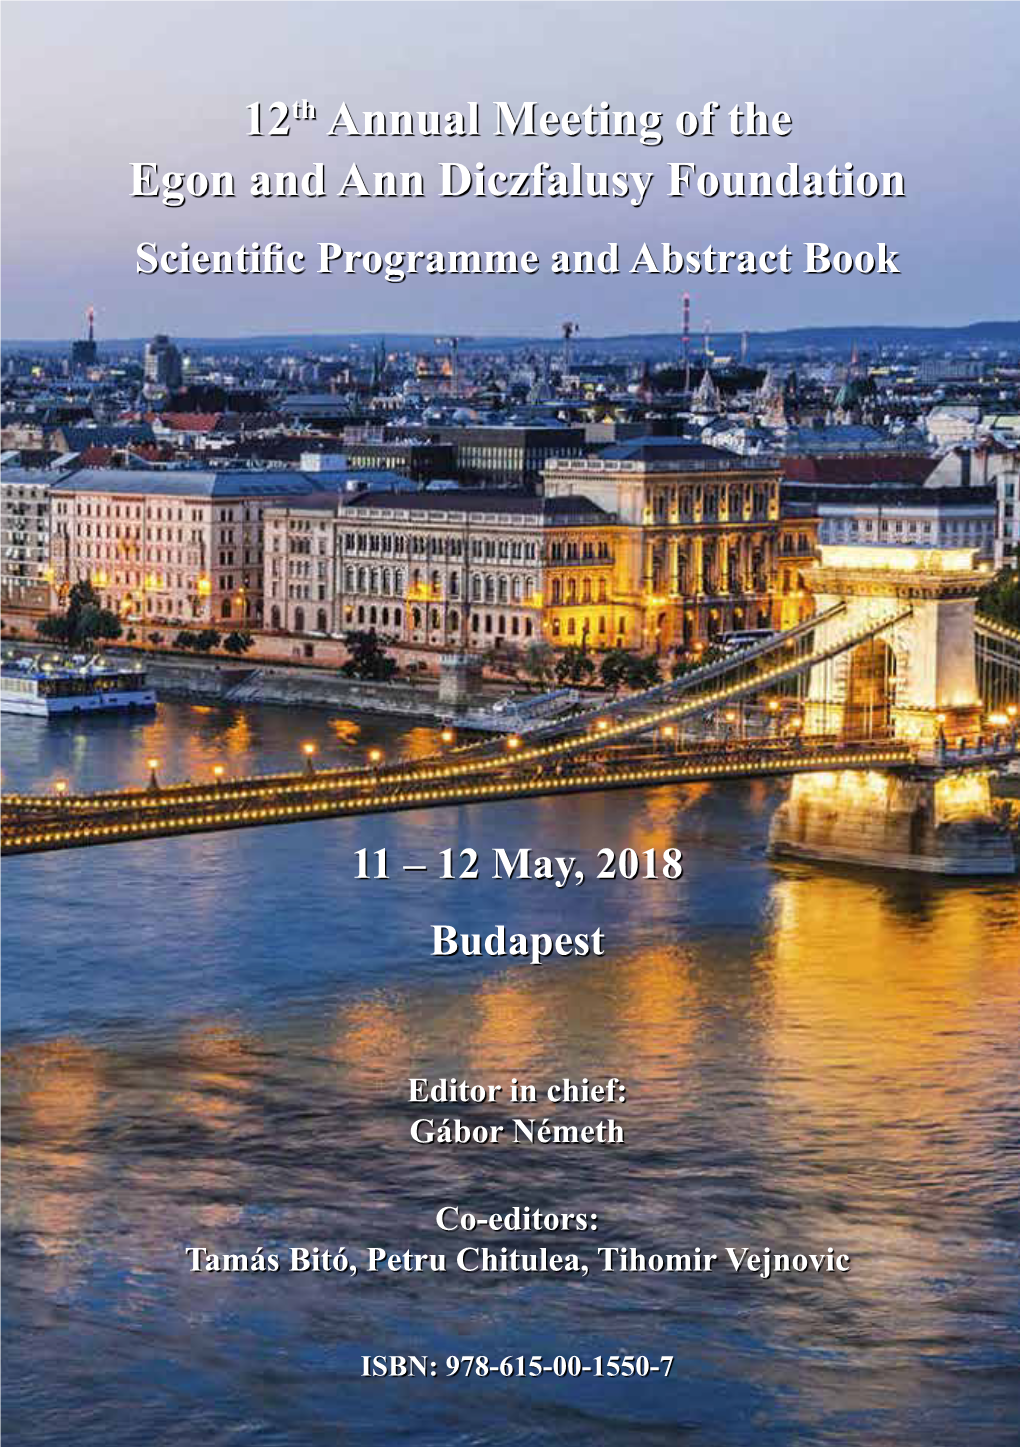 12Th Annual Meeting of the Egon and Ann Diczfalusy Foundation Scientific Programme and Abstract Book